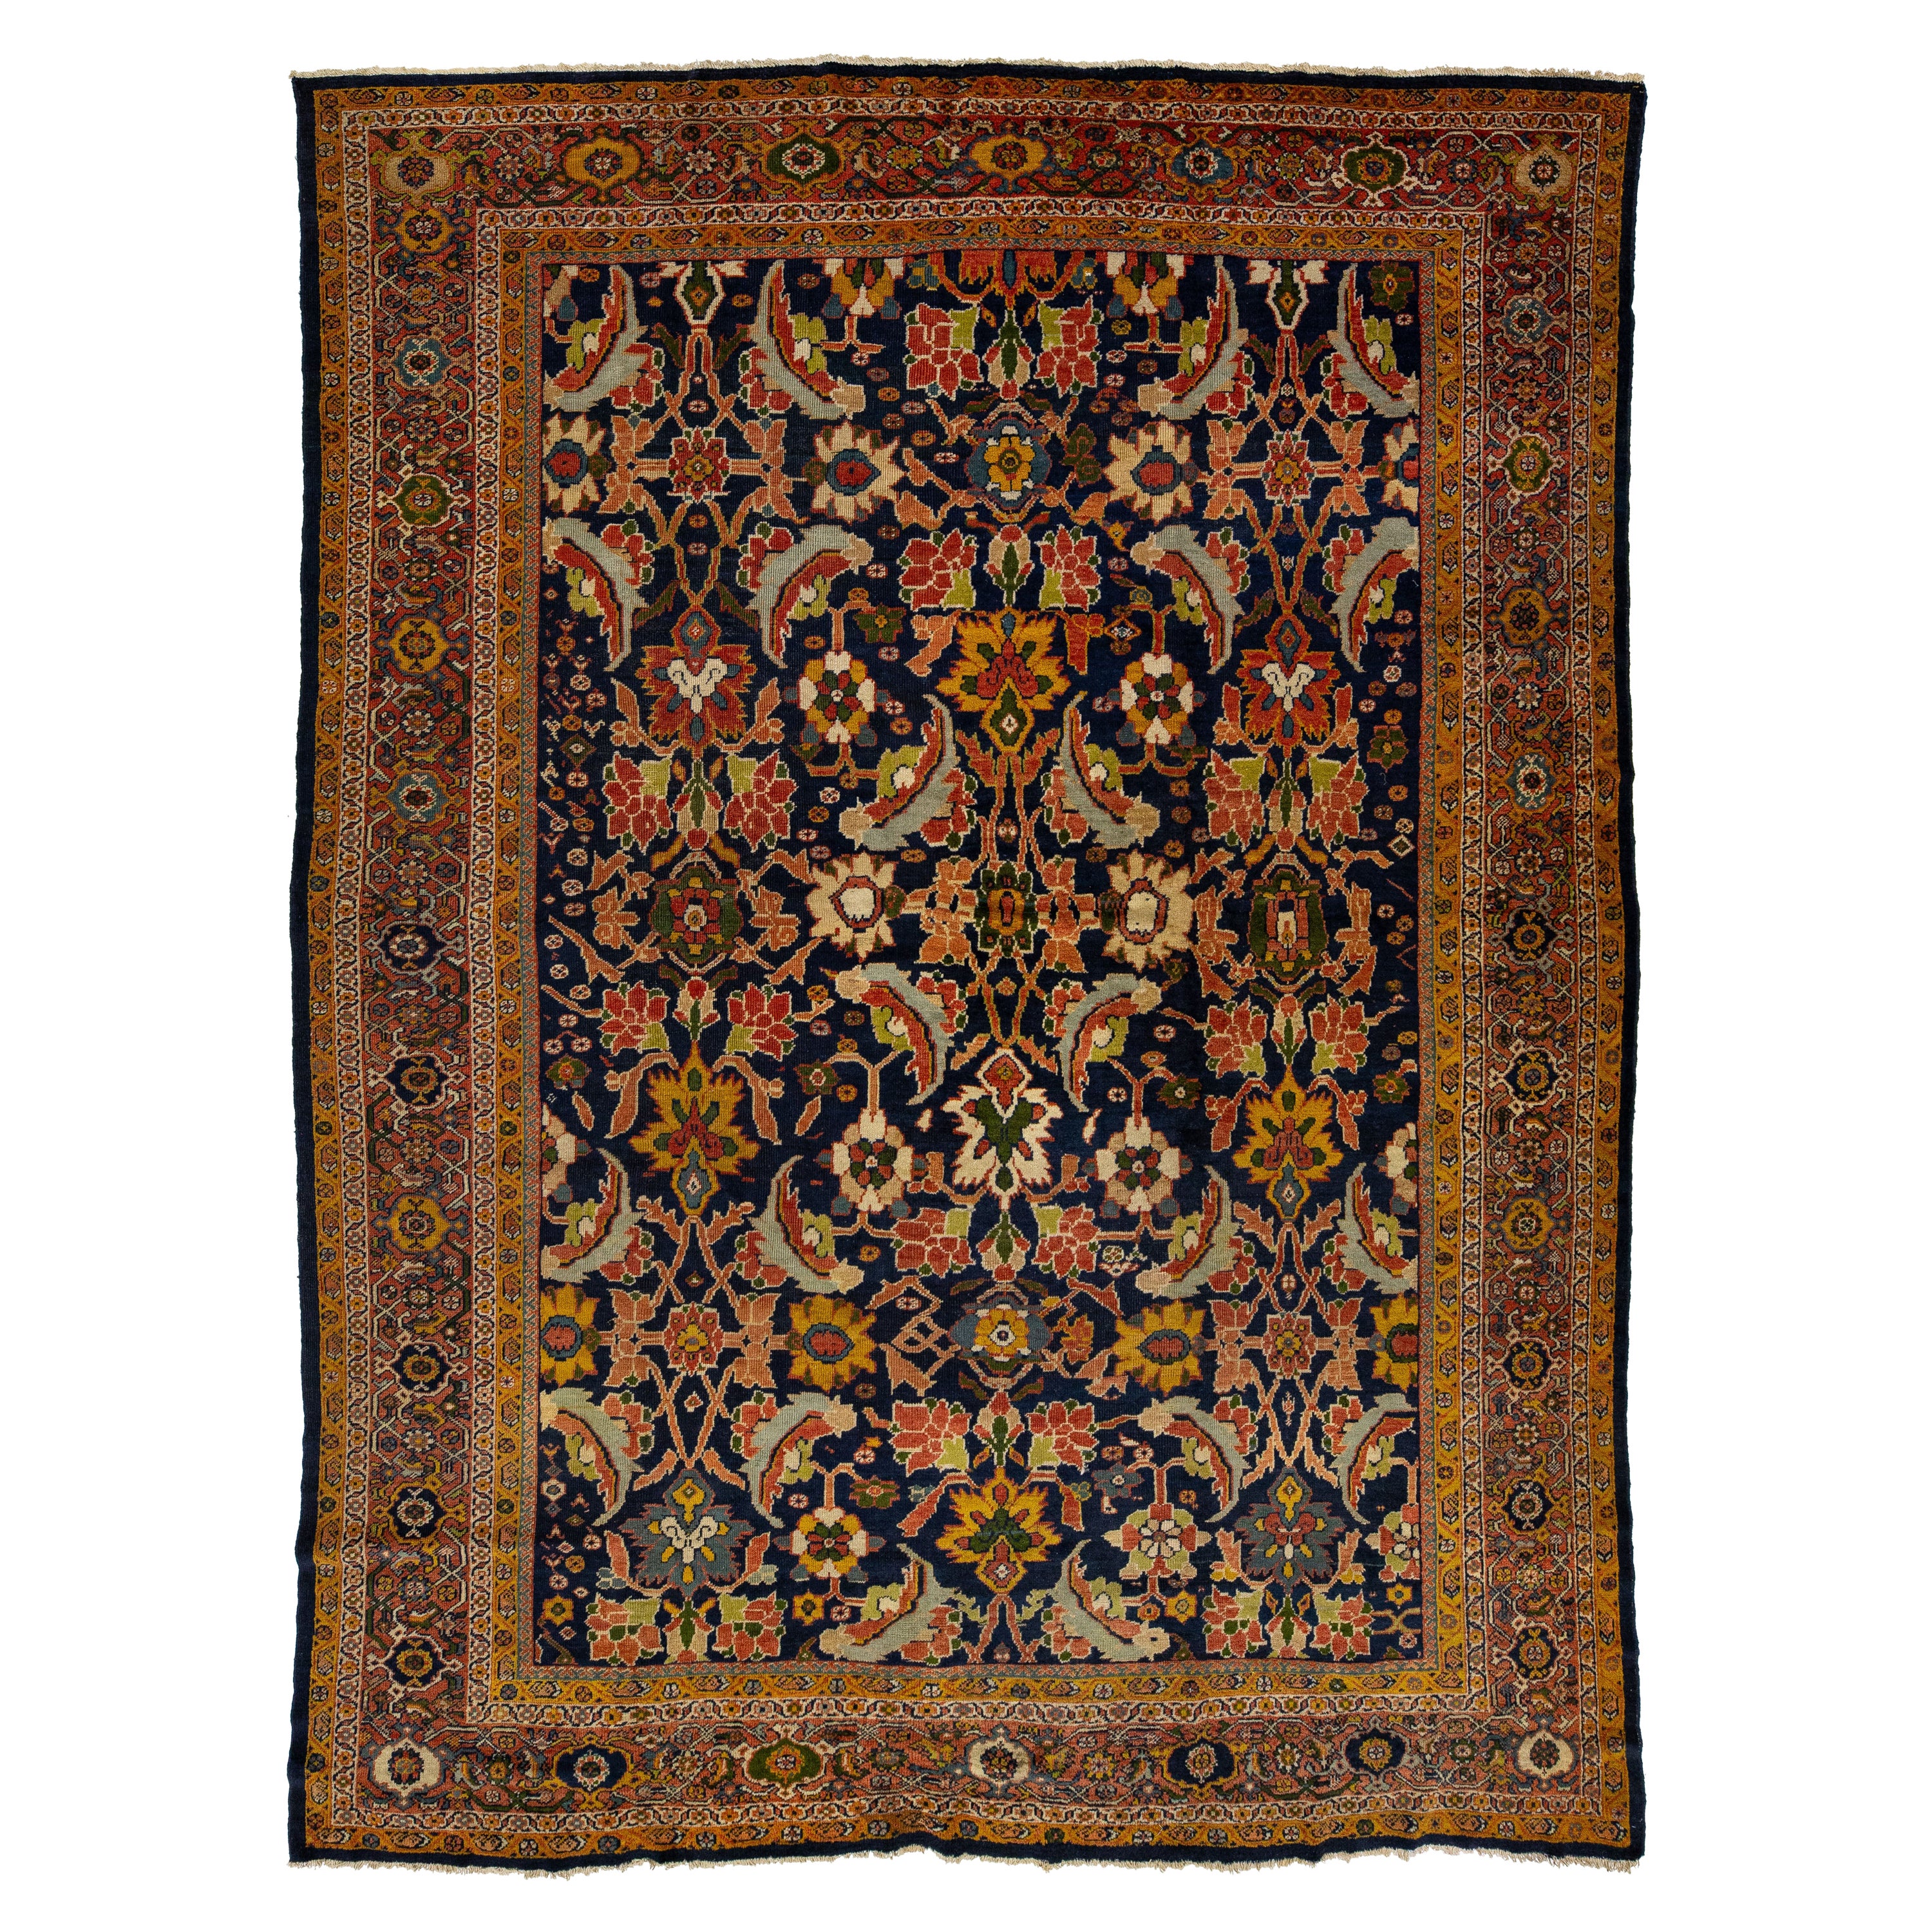 Blue Antique Persian Sultanabad Wool Rug From the 1880s With Floral Motif For Sale